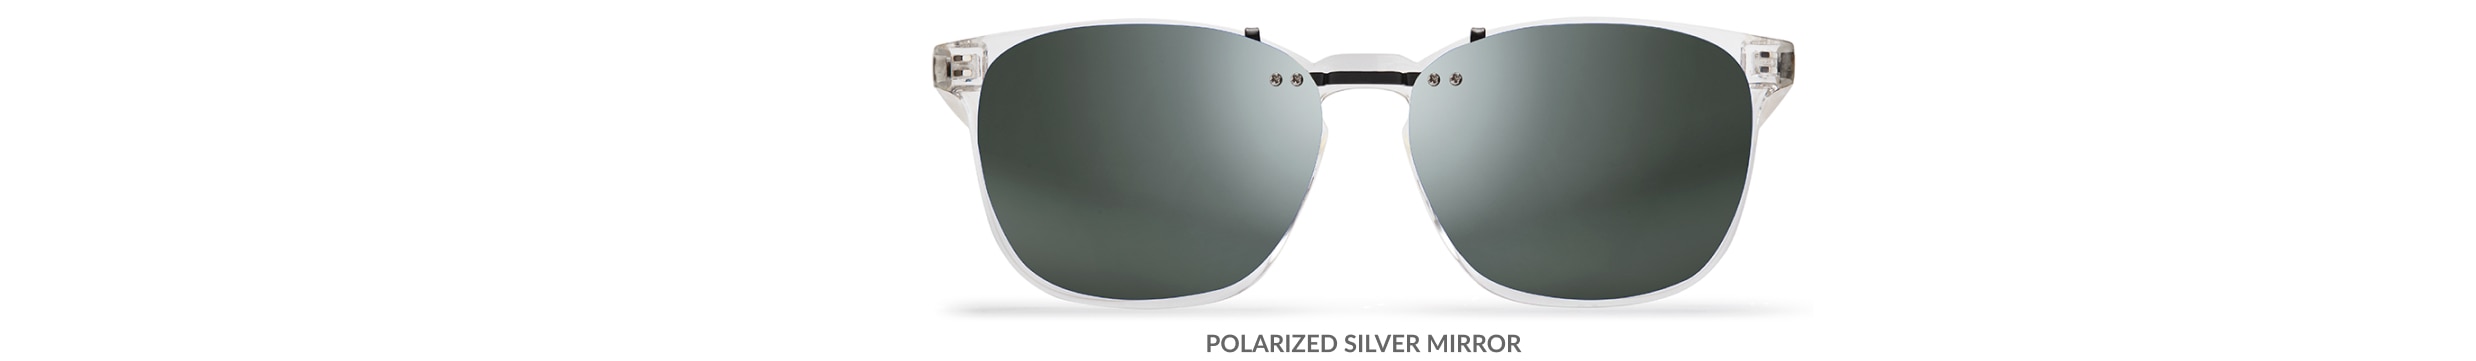 Custom clip-ons. Our polarized custom clip-ons reduce glare and are available for almost any frame. Each clip-on is specially cut to fit the frame with prices starting at just $3.95  (Compare to $50). Zenni square glasses #2020123 in clear, shown with gradient gray polarized custom clip-on.